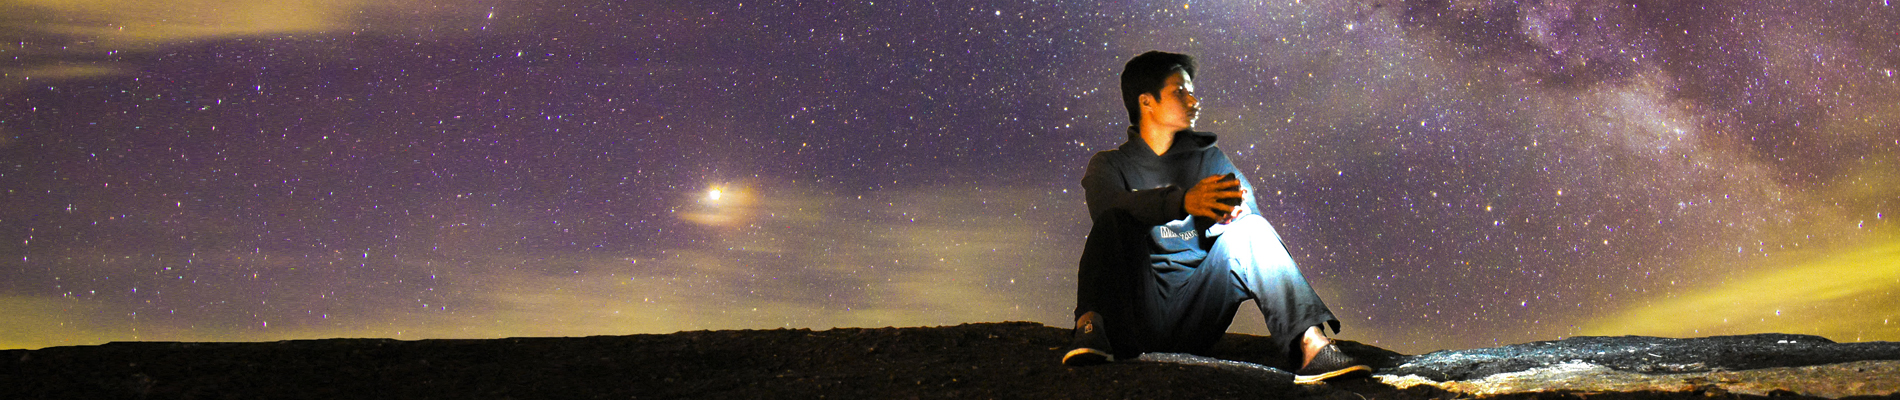 Young man sitting on the ground under the night sky